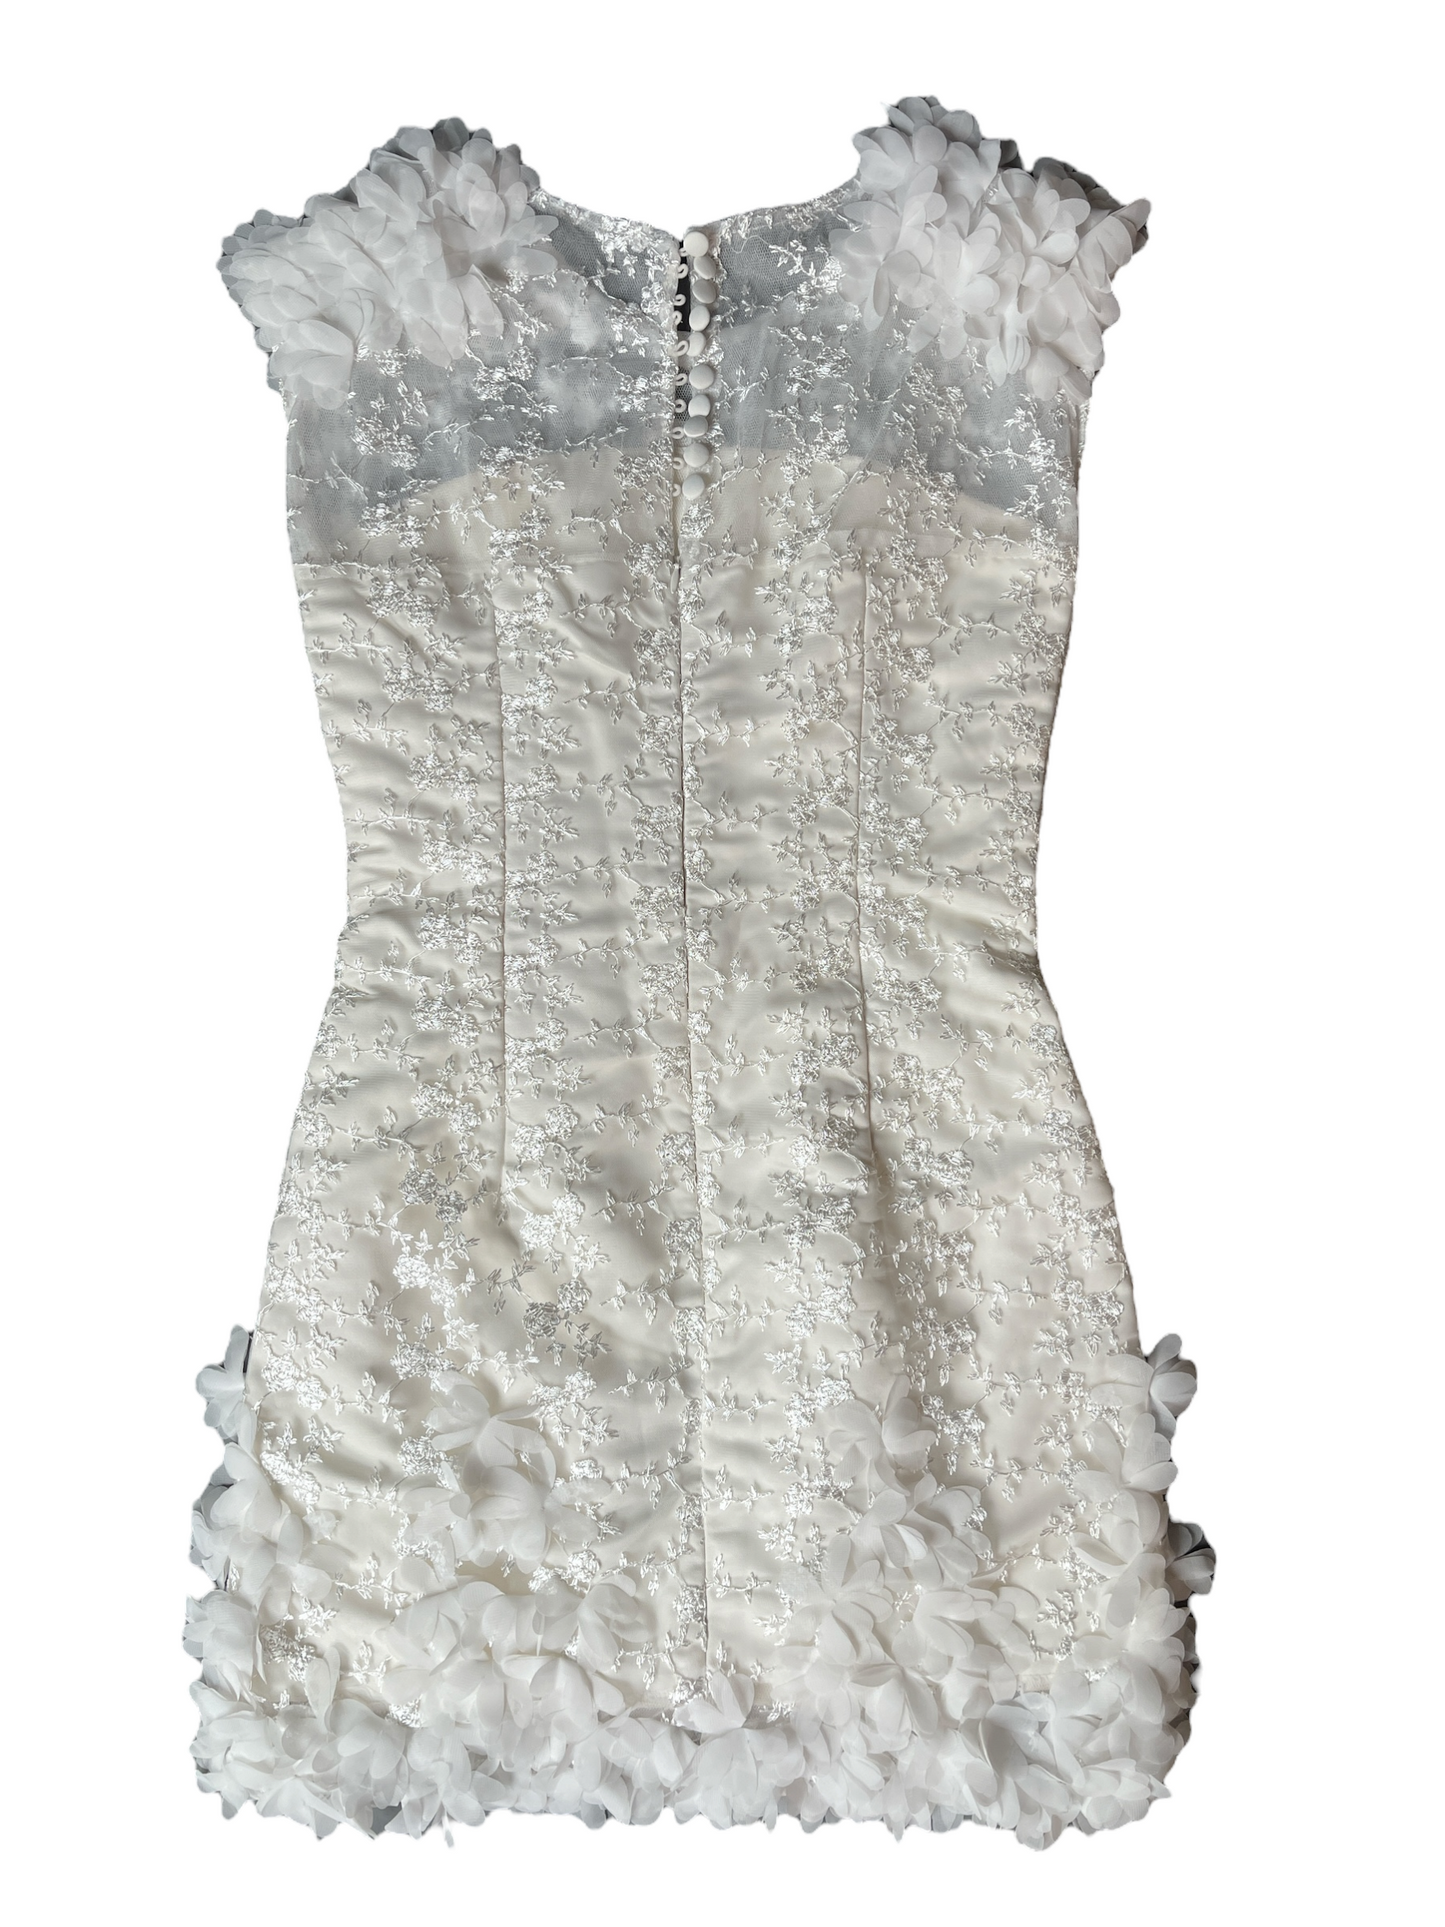 Handmade Designer White Formal Dress with Lace Detailing, Size S